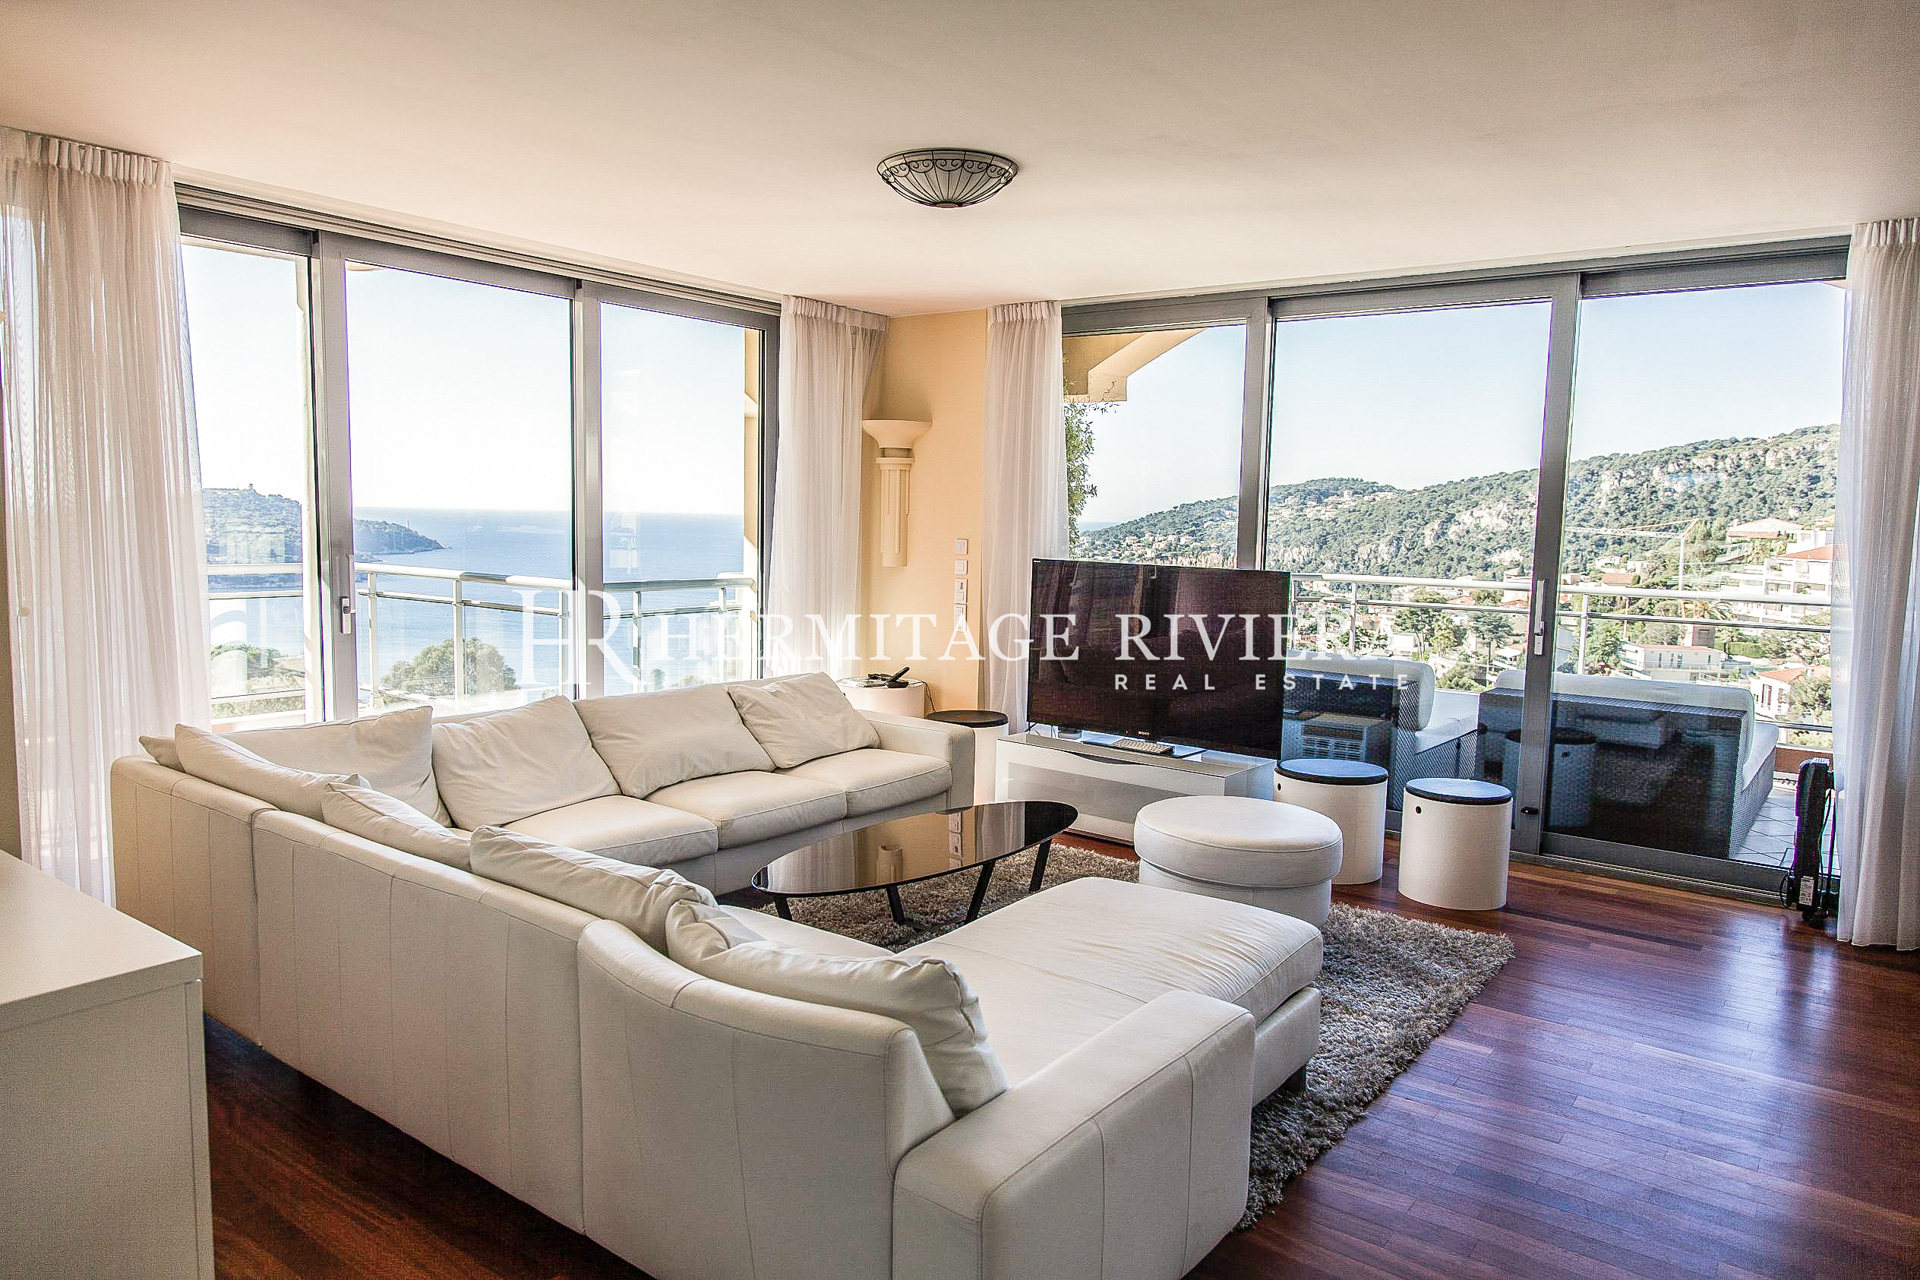 Spacious penthouse with outstanding views of the bay (image 7)